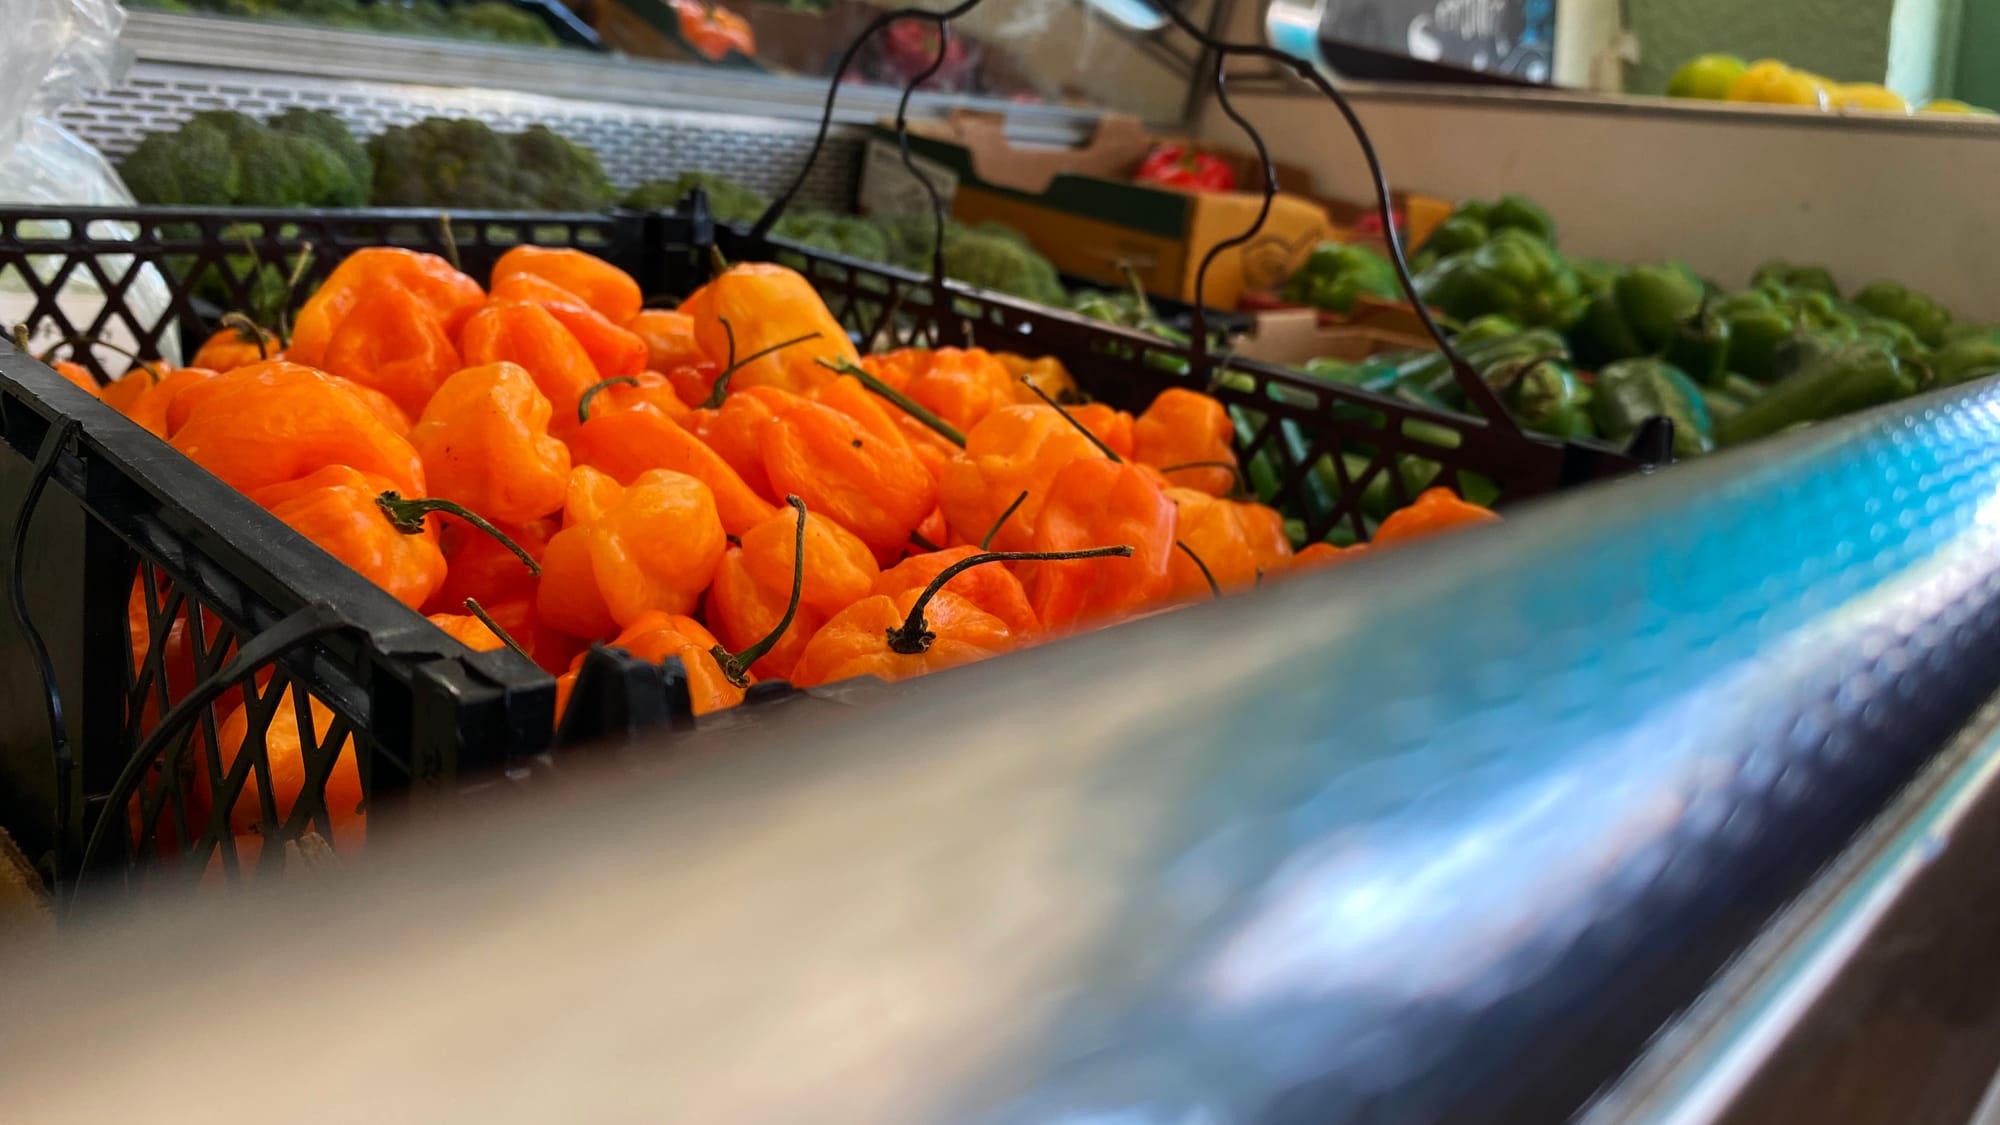 New Supplier for B Street Market Ensures Local Access to Fresh Fruit and Vegetables